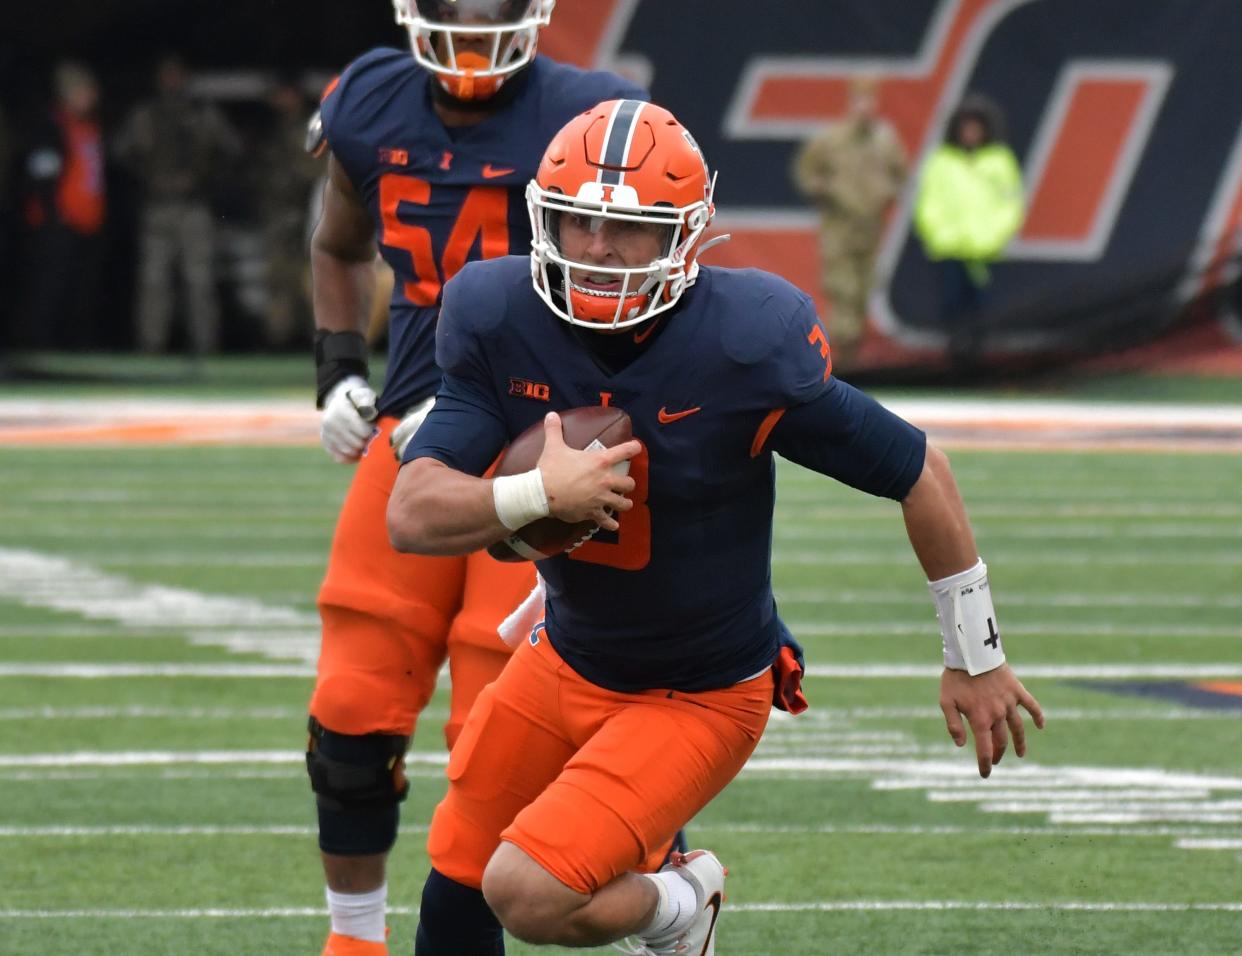 Will the Illini win their bowl game? Who experts are picking to win the